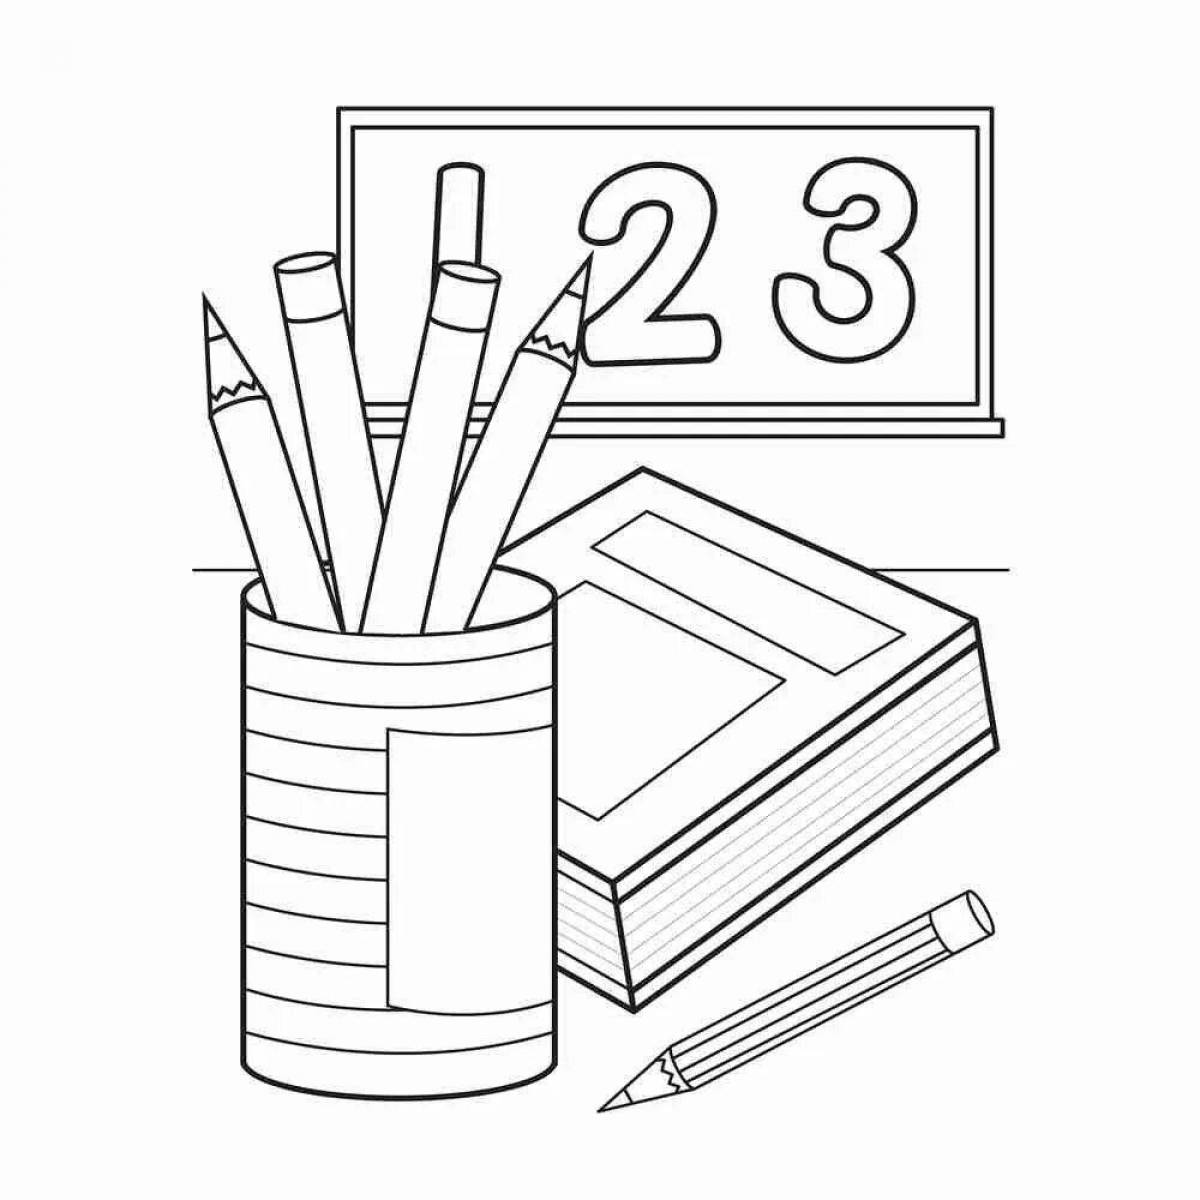 Coloring page of the school building